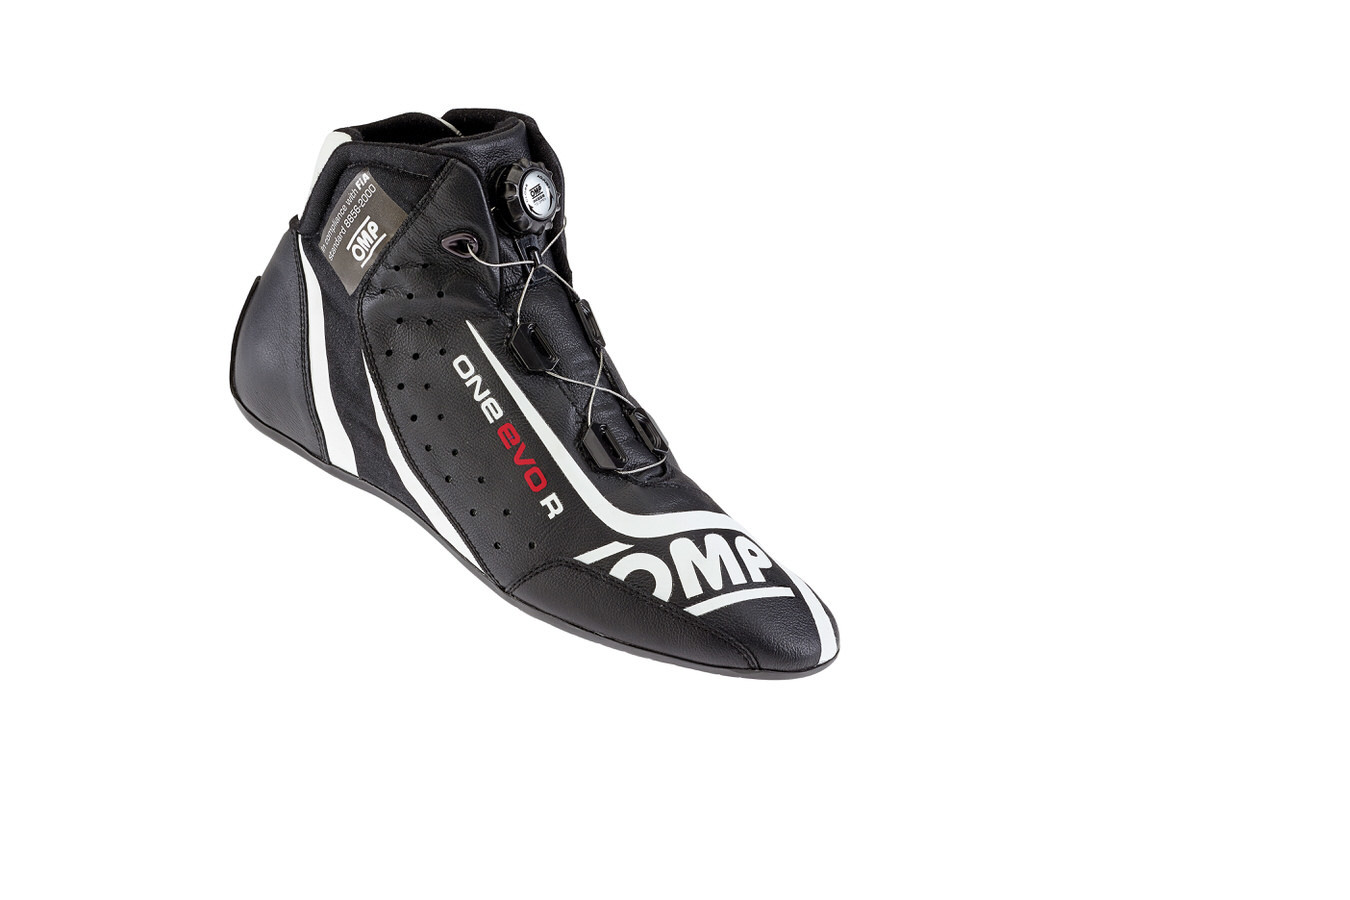 OMP Racing IC80507144 - Shoe, One Evo R, Driving, Mid-Top, FIA Approved, Leather Outer, Fire Retardant Fabric Inner, Black, Euro Size 44, Pair